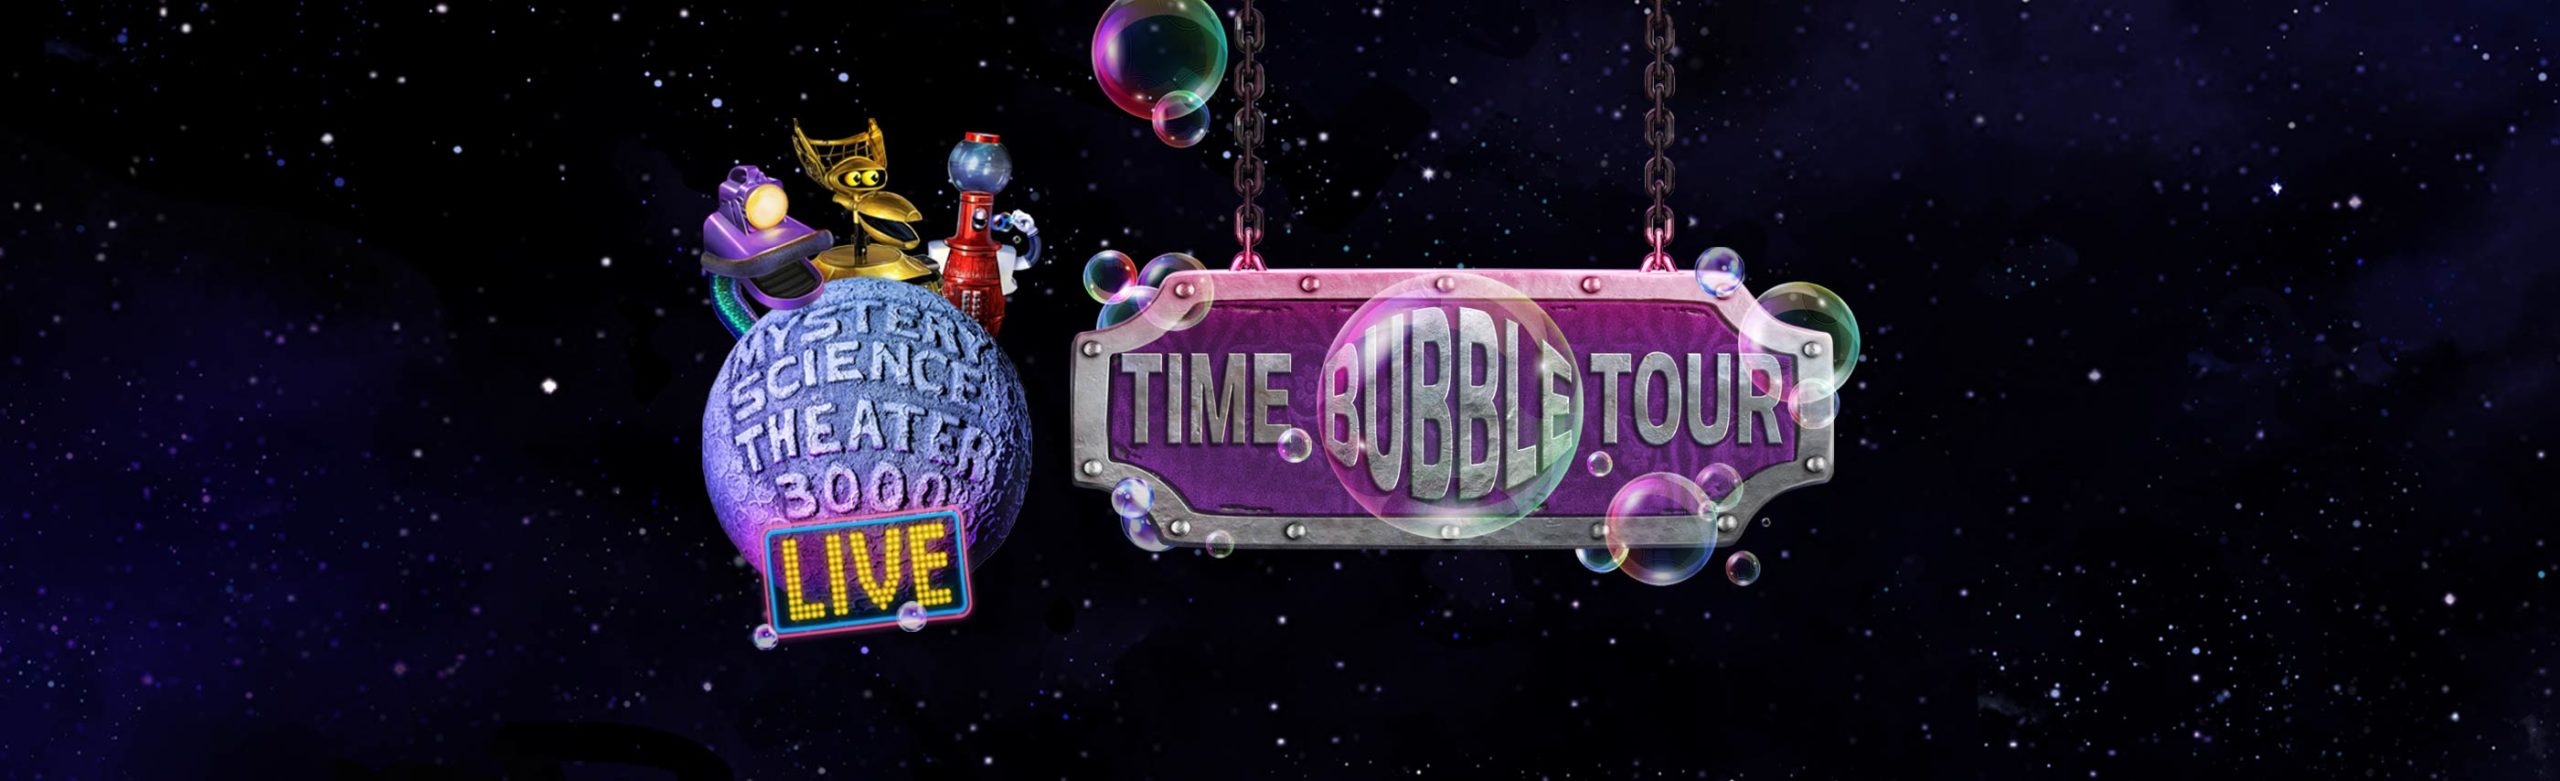 Mystery Science Theater 3000 LIVE Lands in Missoula for the Time Bubble Tour Image